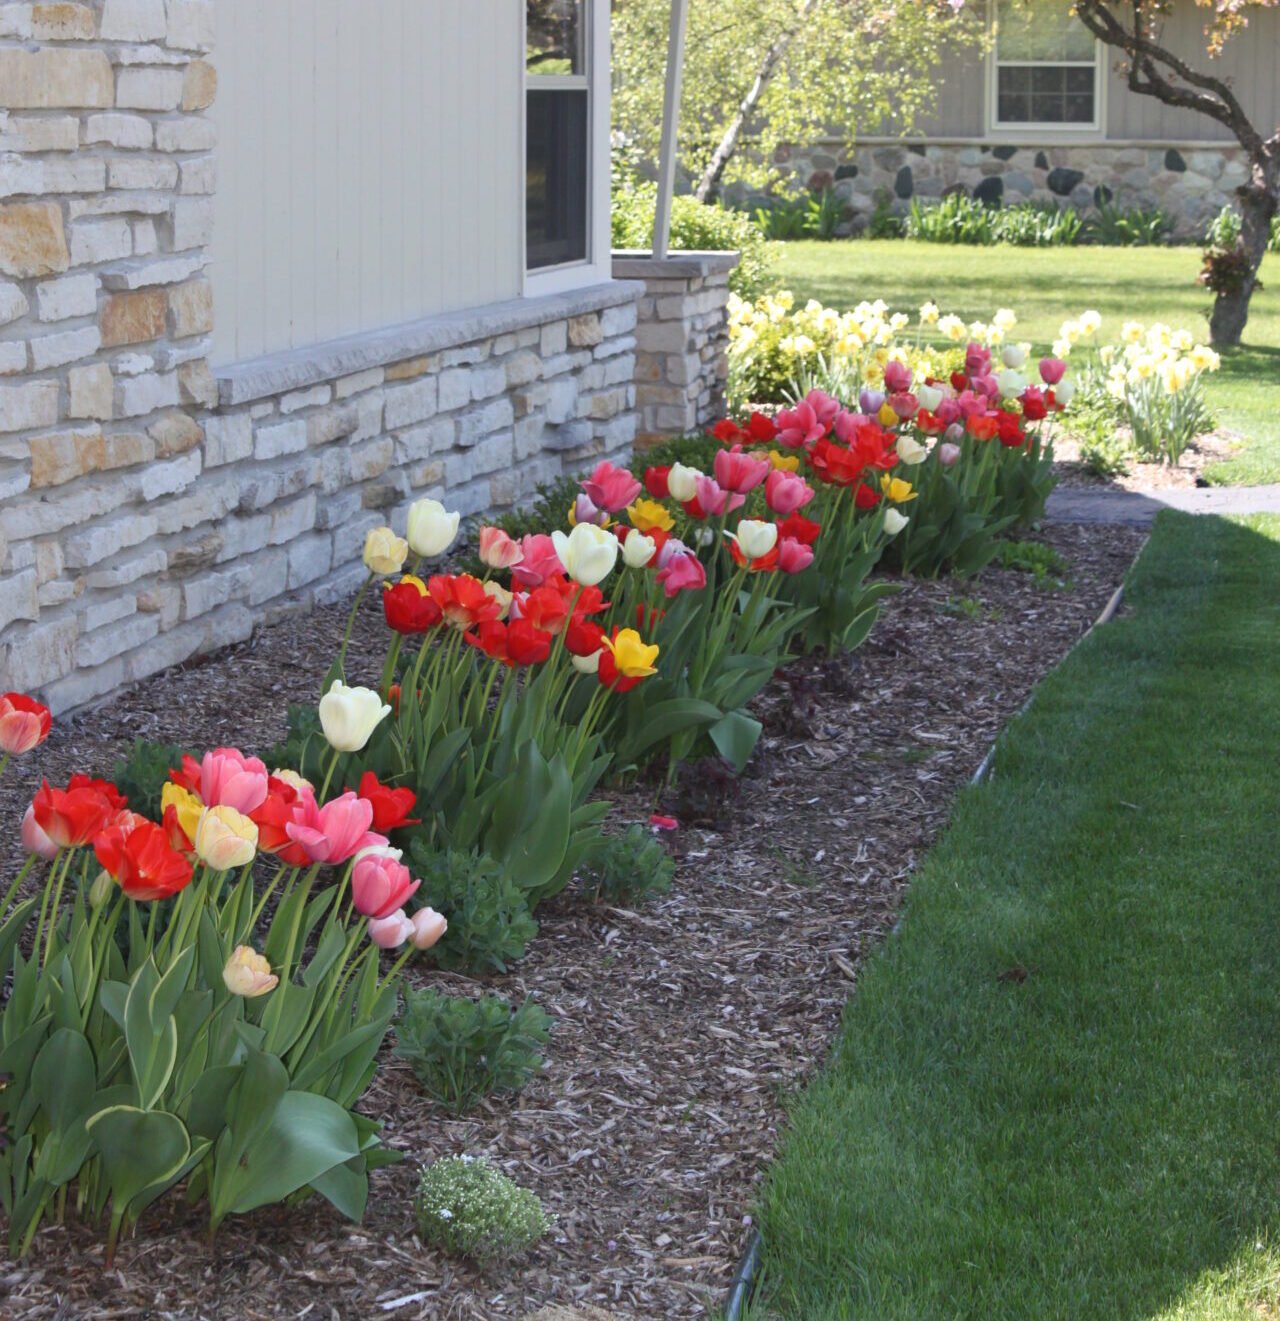 A neatly maintained garden with a vibrant array of tulips next to a house with stone and siding exterior under a clear blue sky.